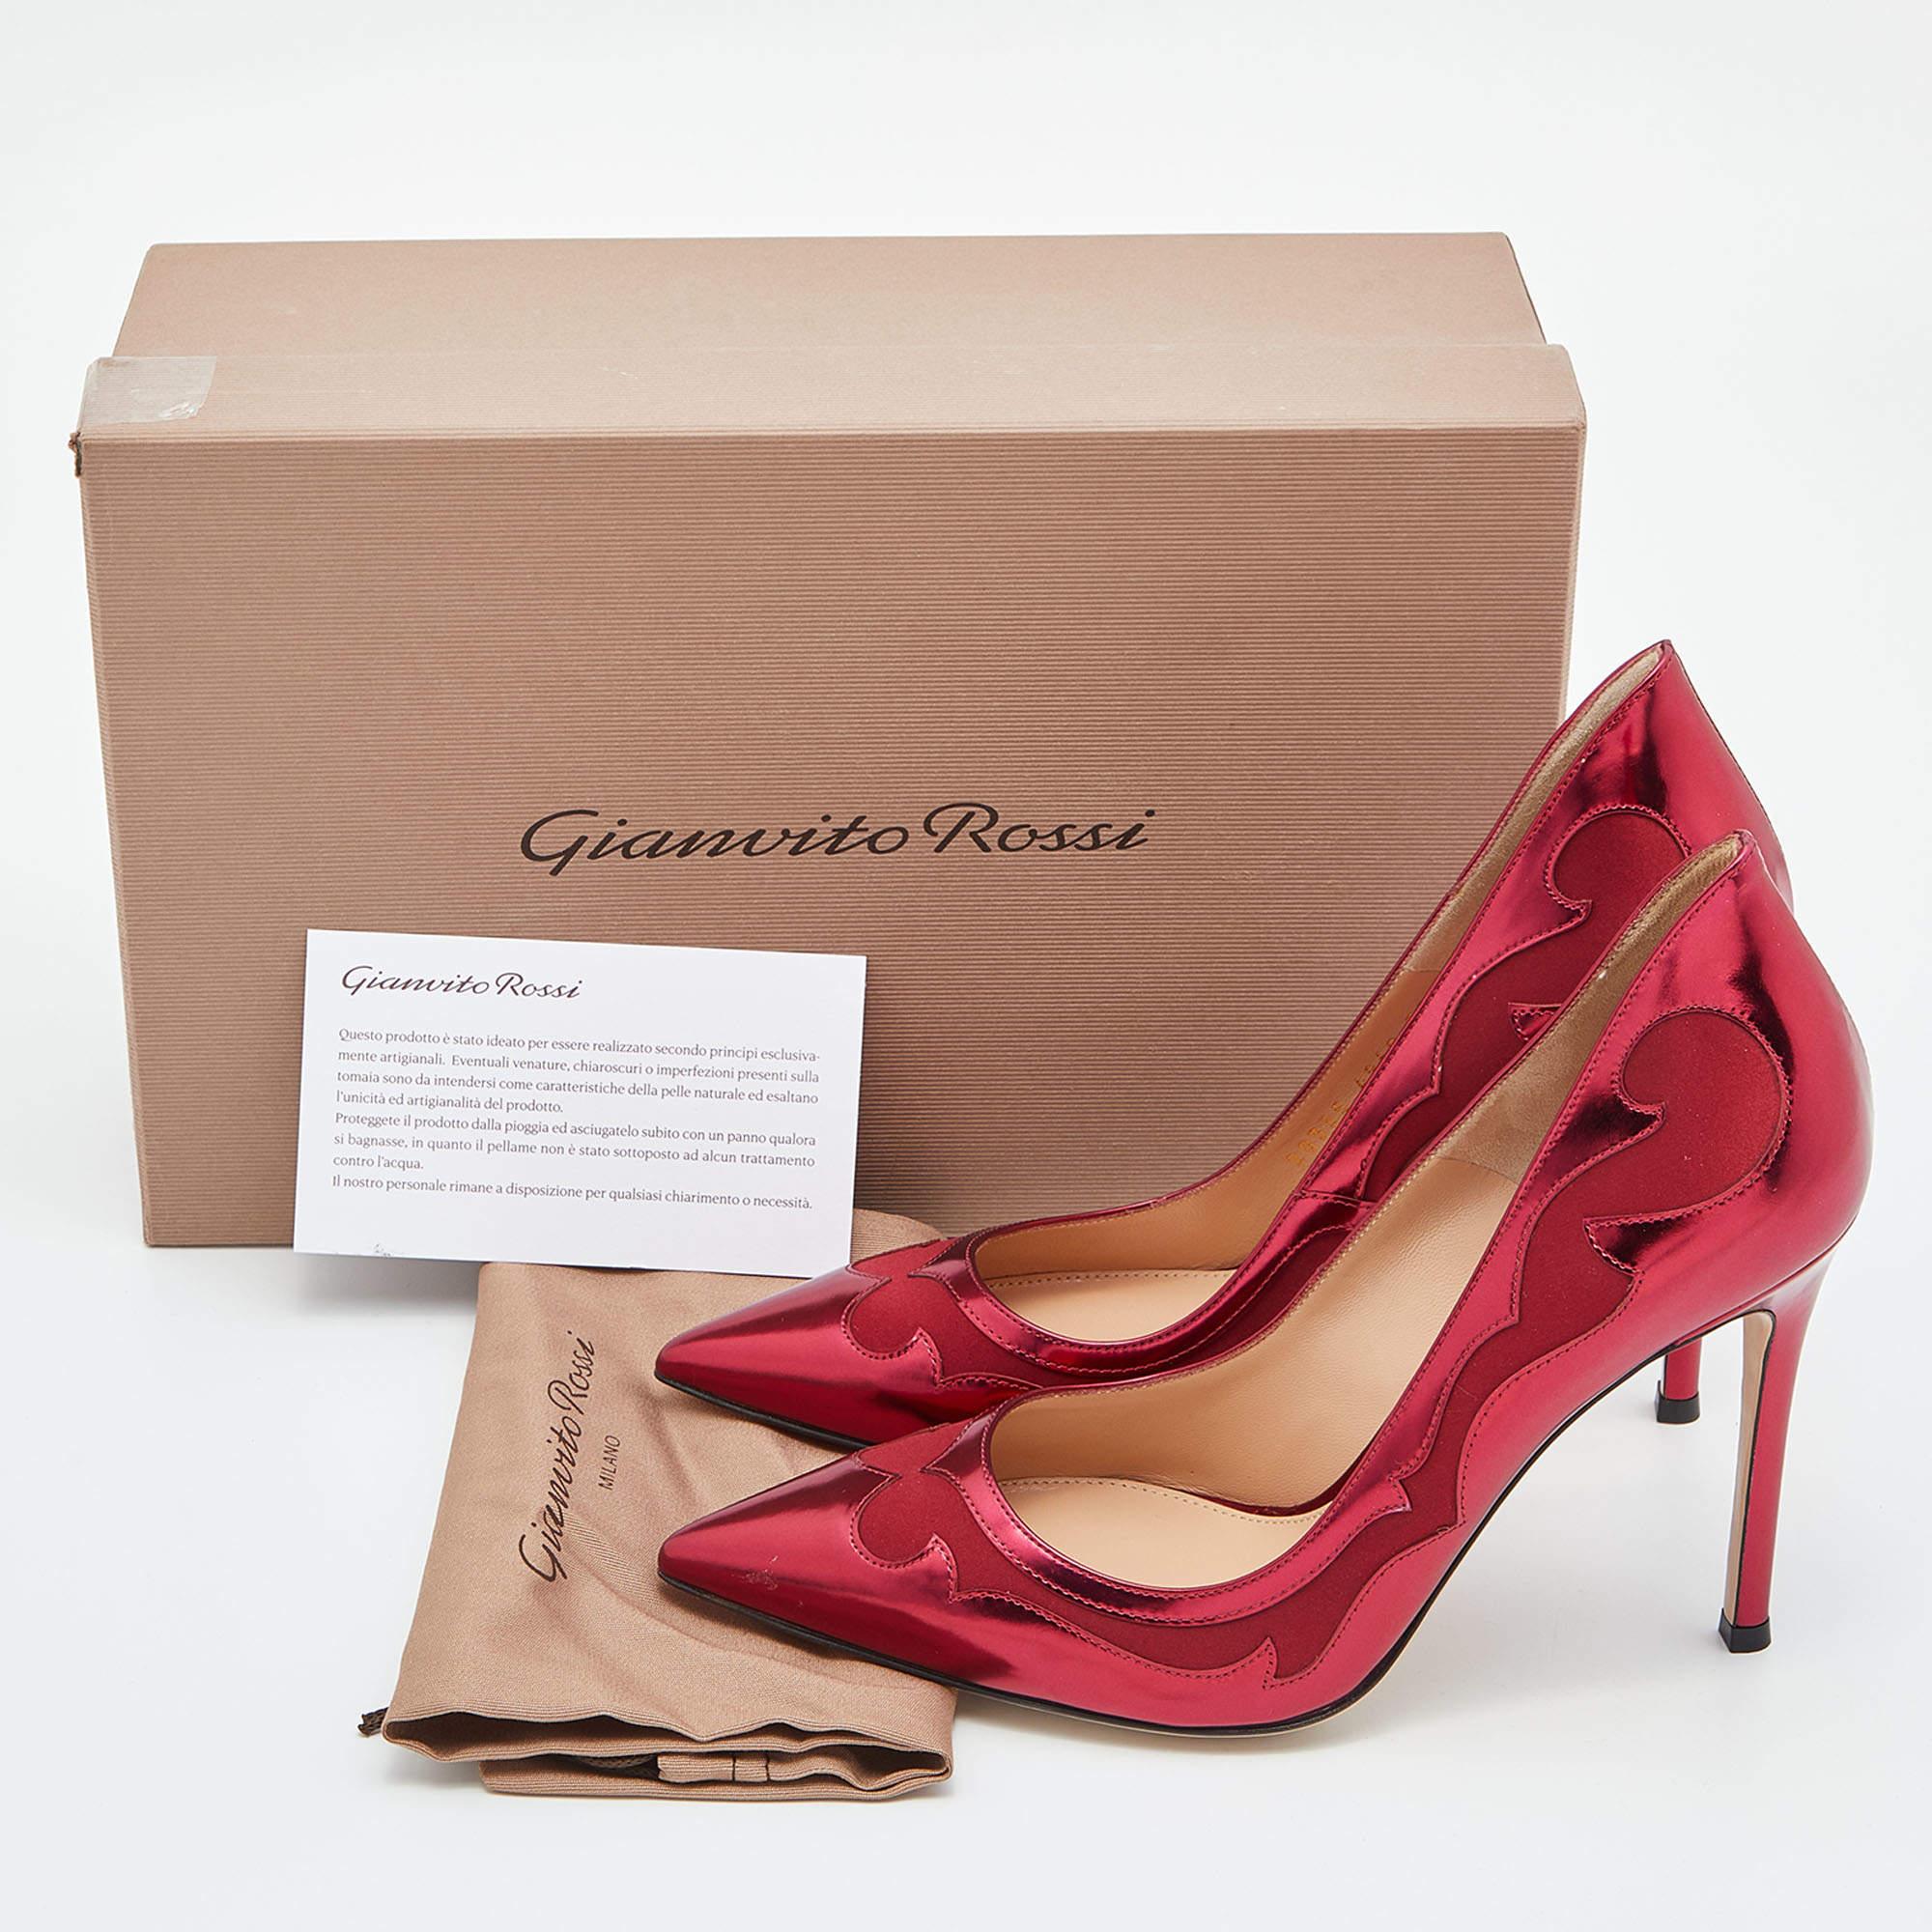 Gianvito Rossi Burgundy Laser Cut Leather and Satin Pointed Toe Pumps Size 38 2